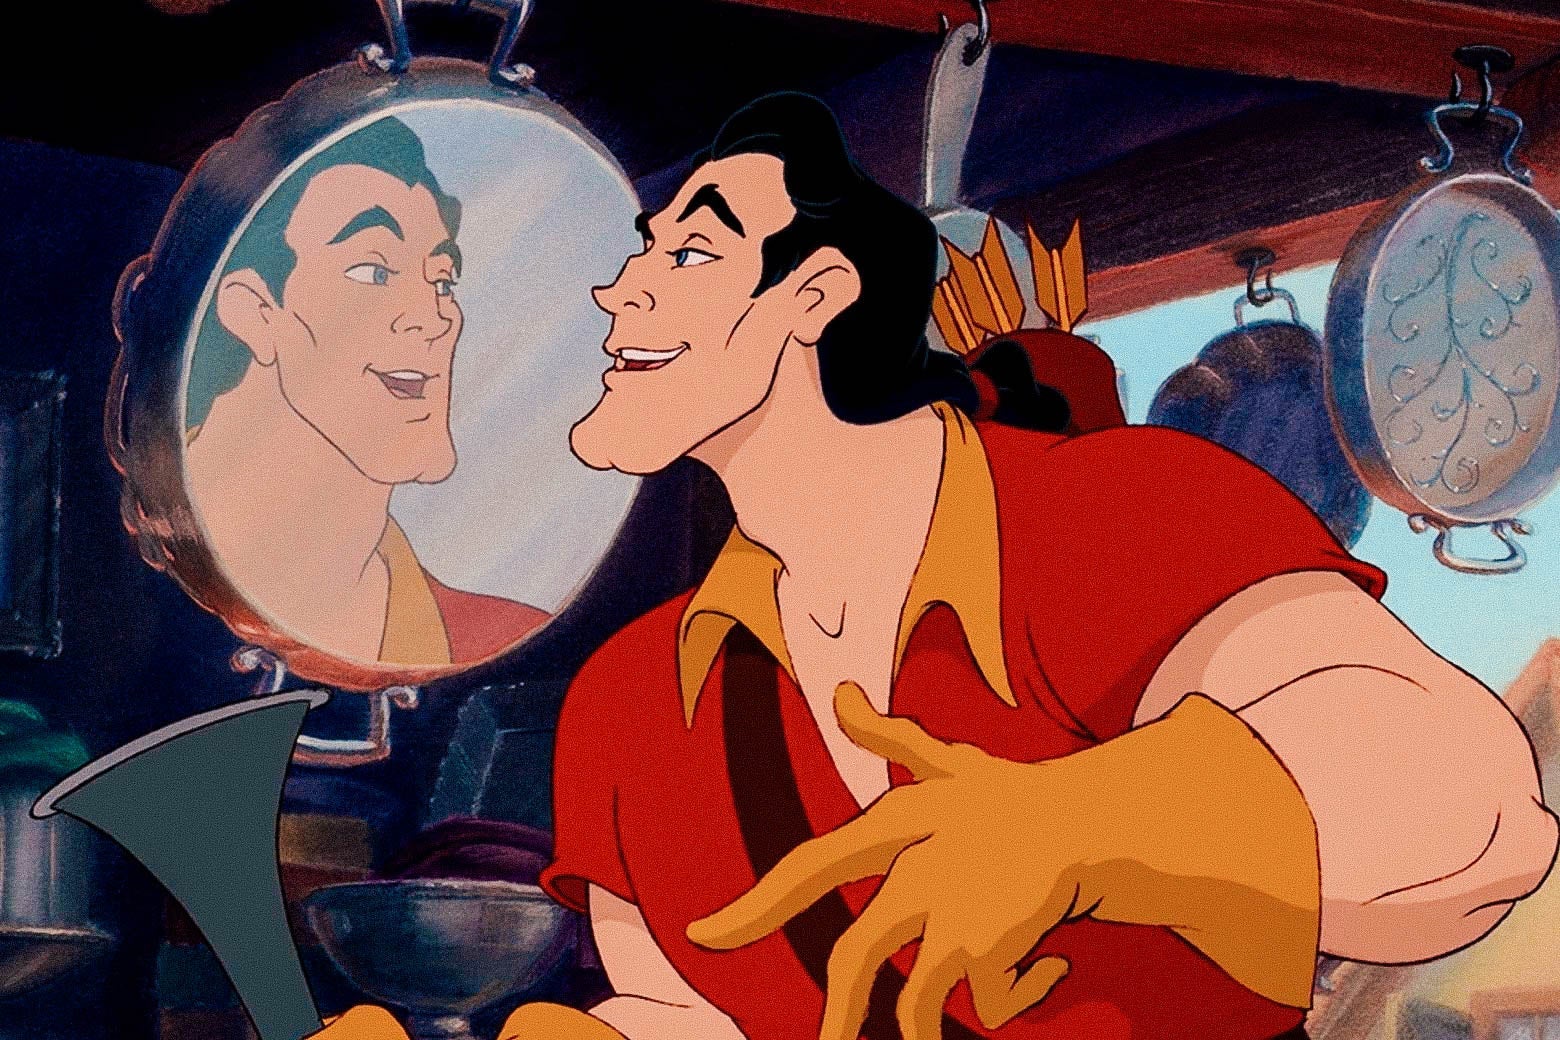 Still from the animated film of Gaston admiring his reflection in a shiny metal pan